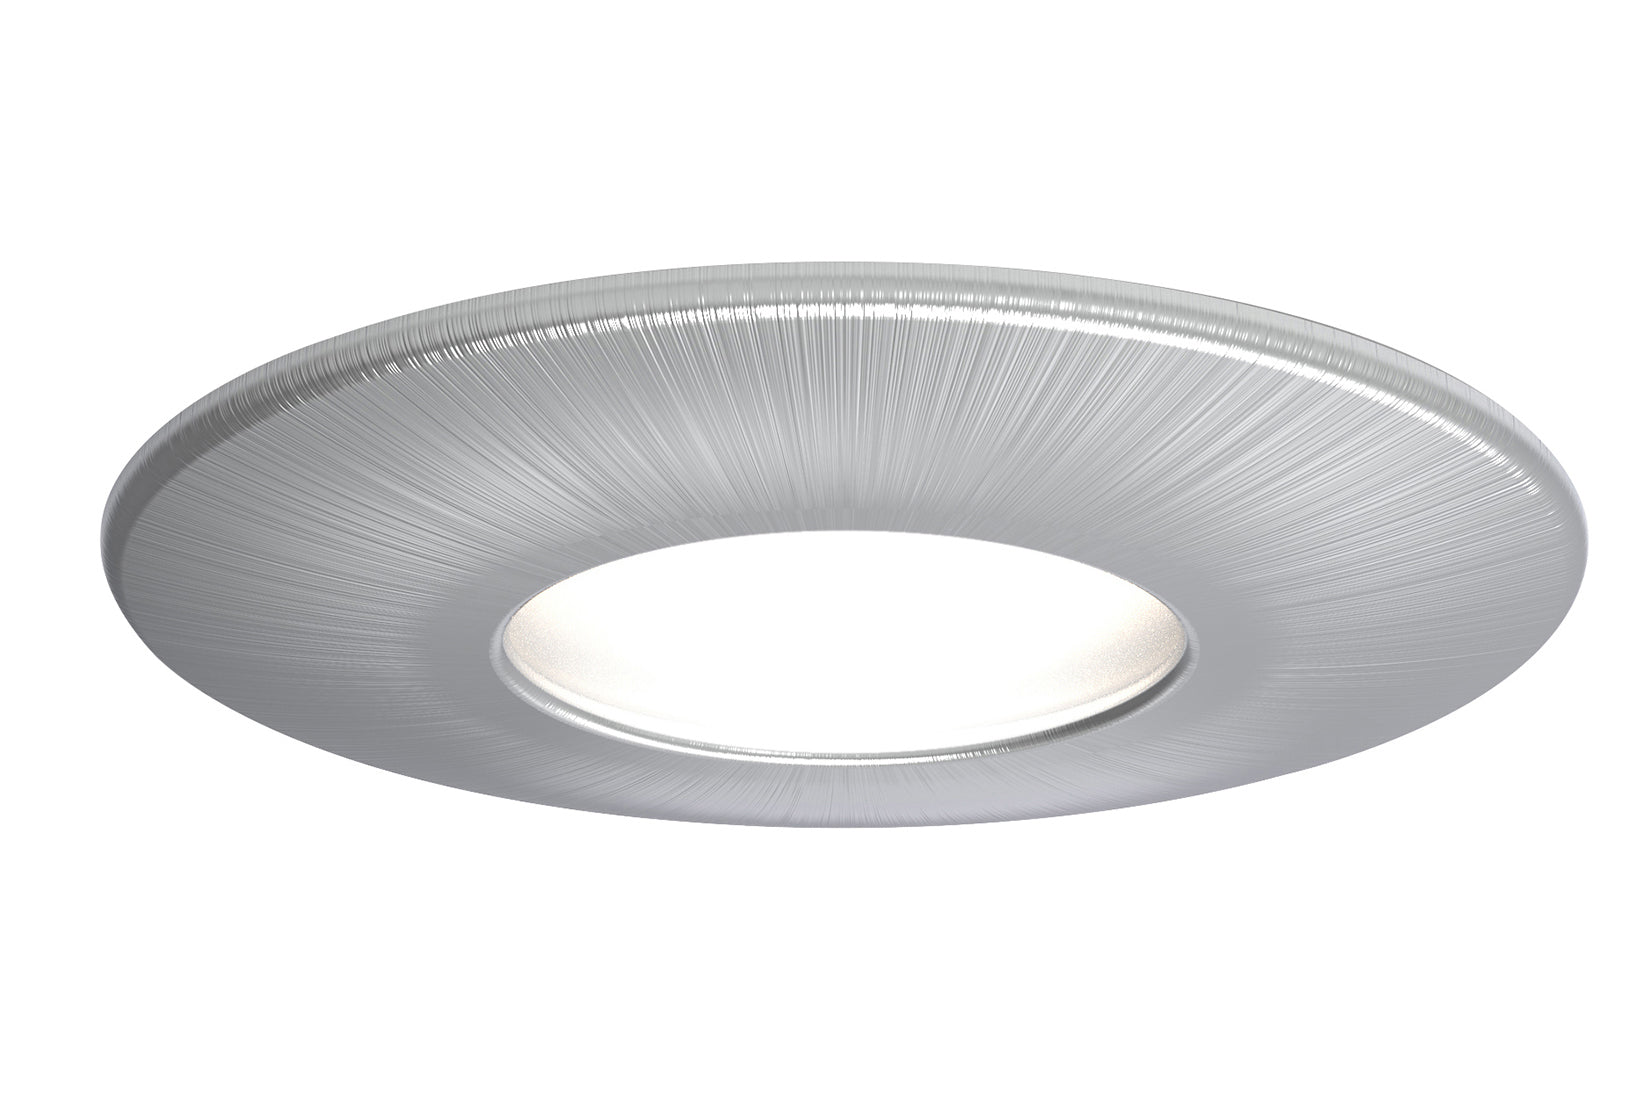 4lite WiZ Connected Fire-Rated IP65 GU10 Smart LED Downlight - Satin Chrome (Single)